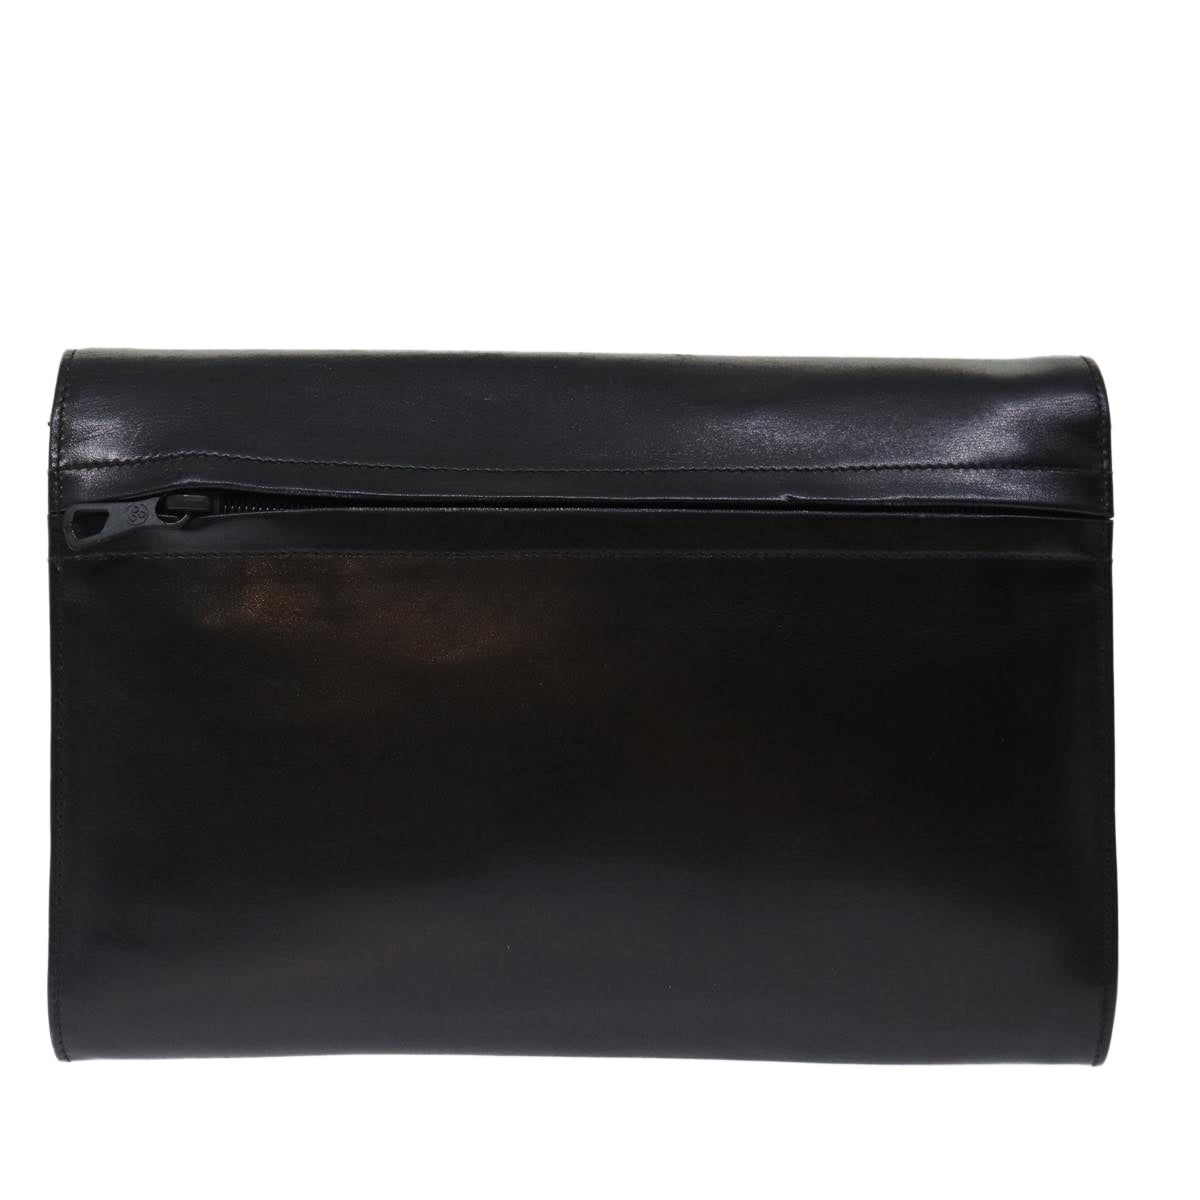 GIVENCHY Clutch Bag Leather Black Auth bs13389